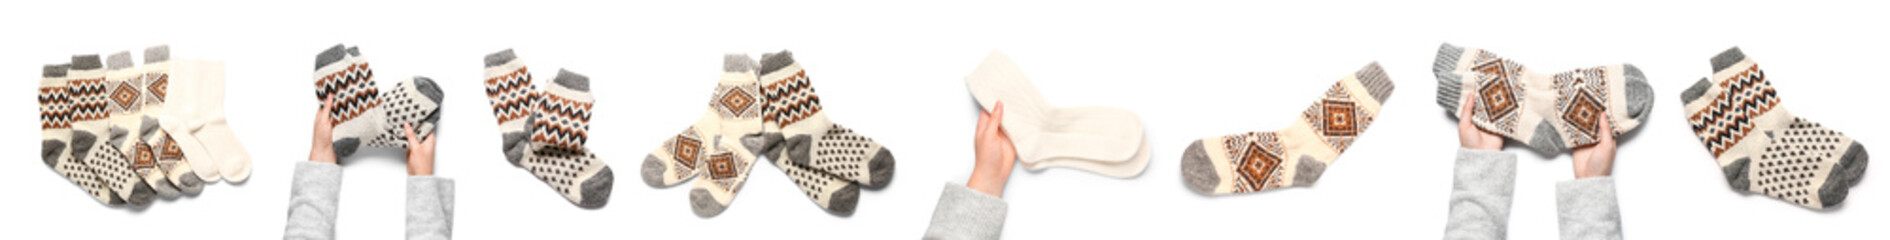 Set of different warm knitted socks on white background